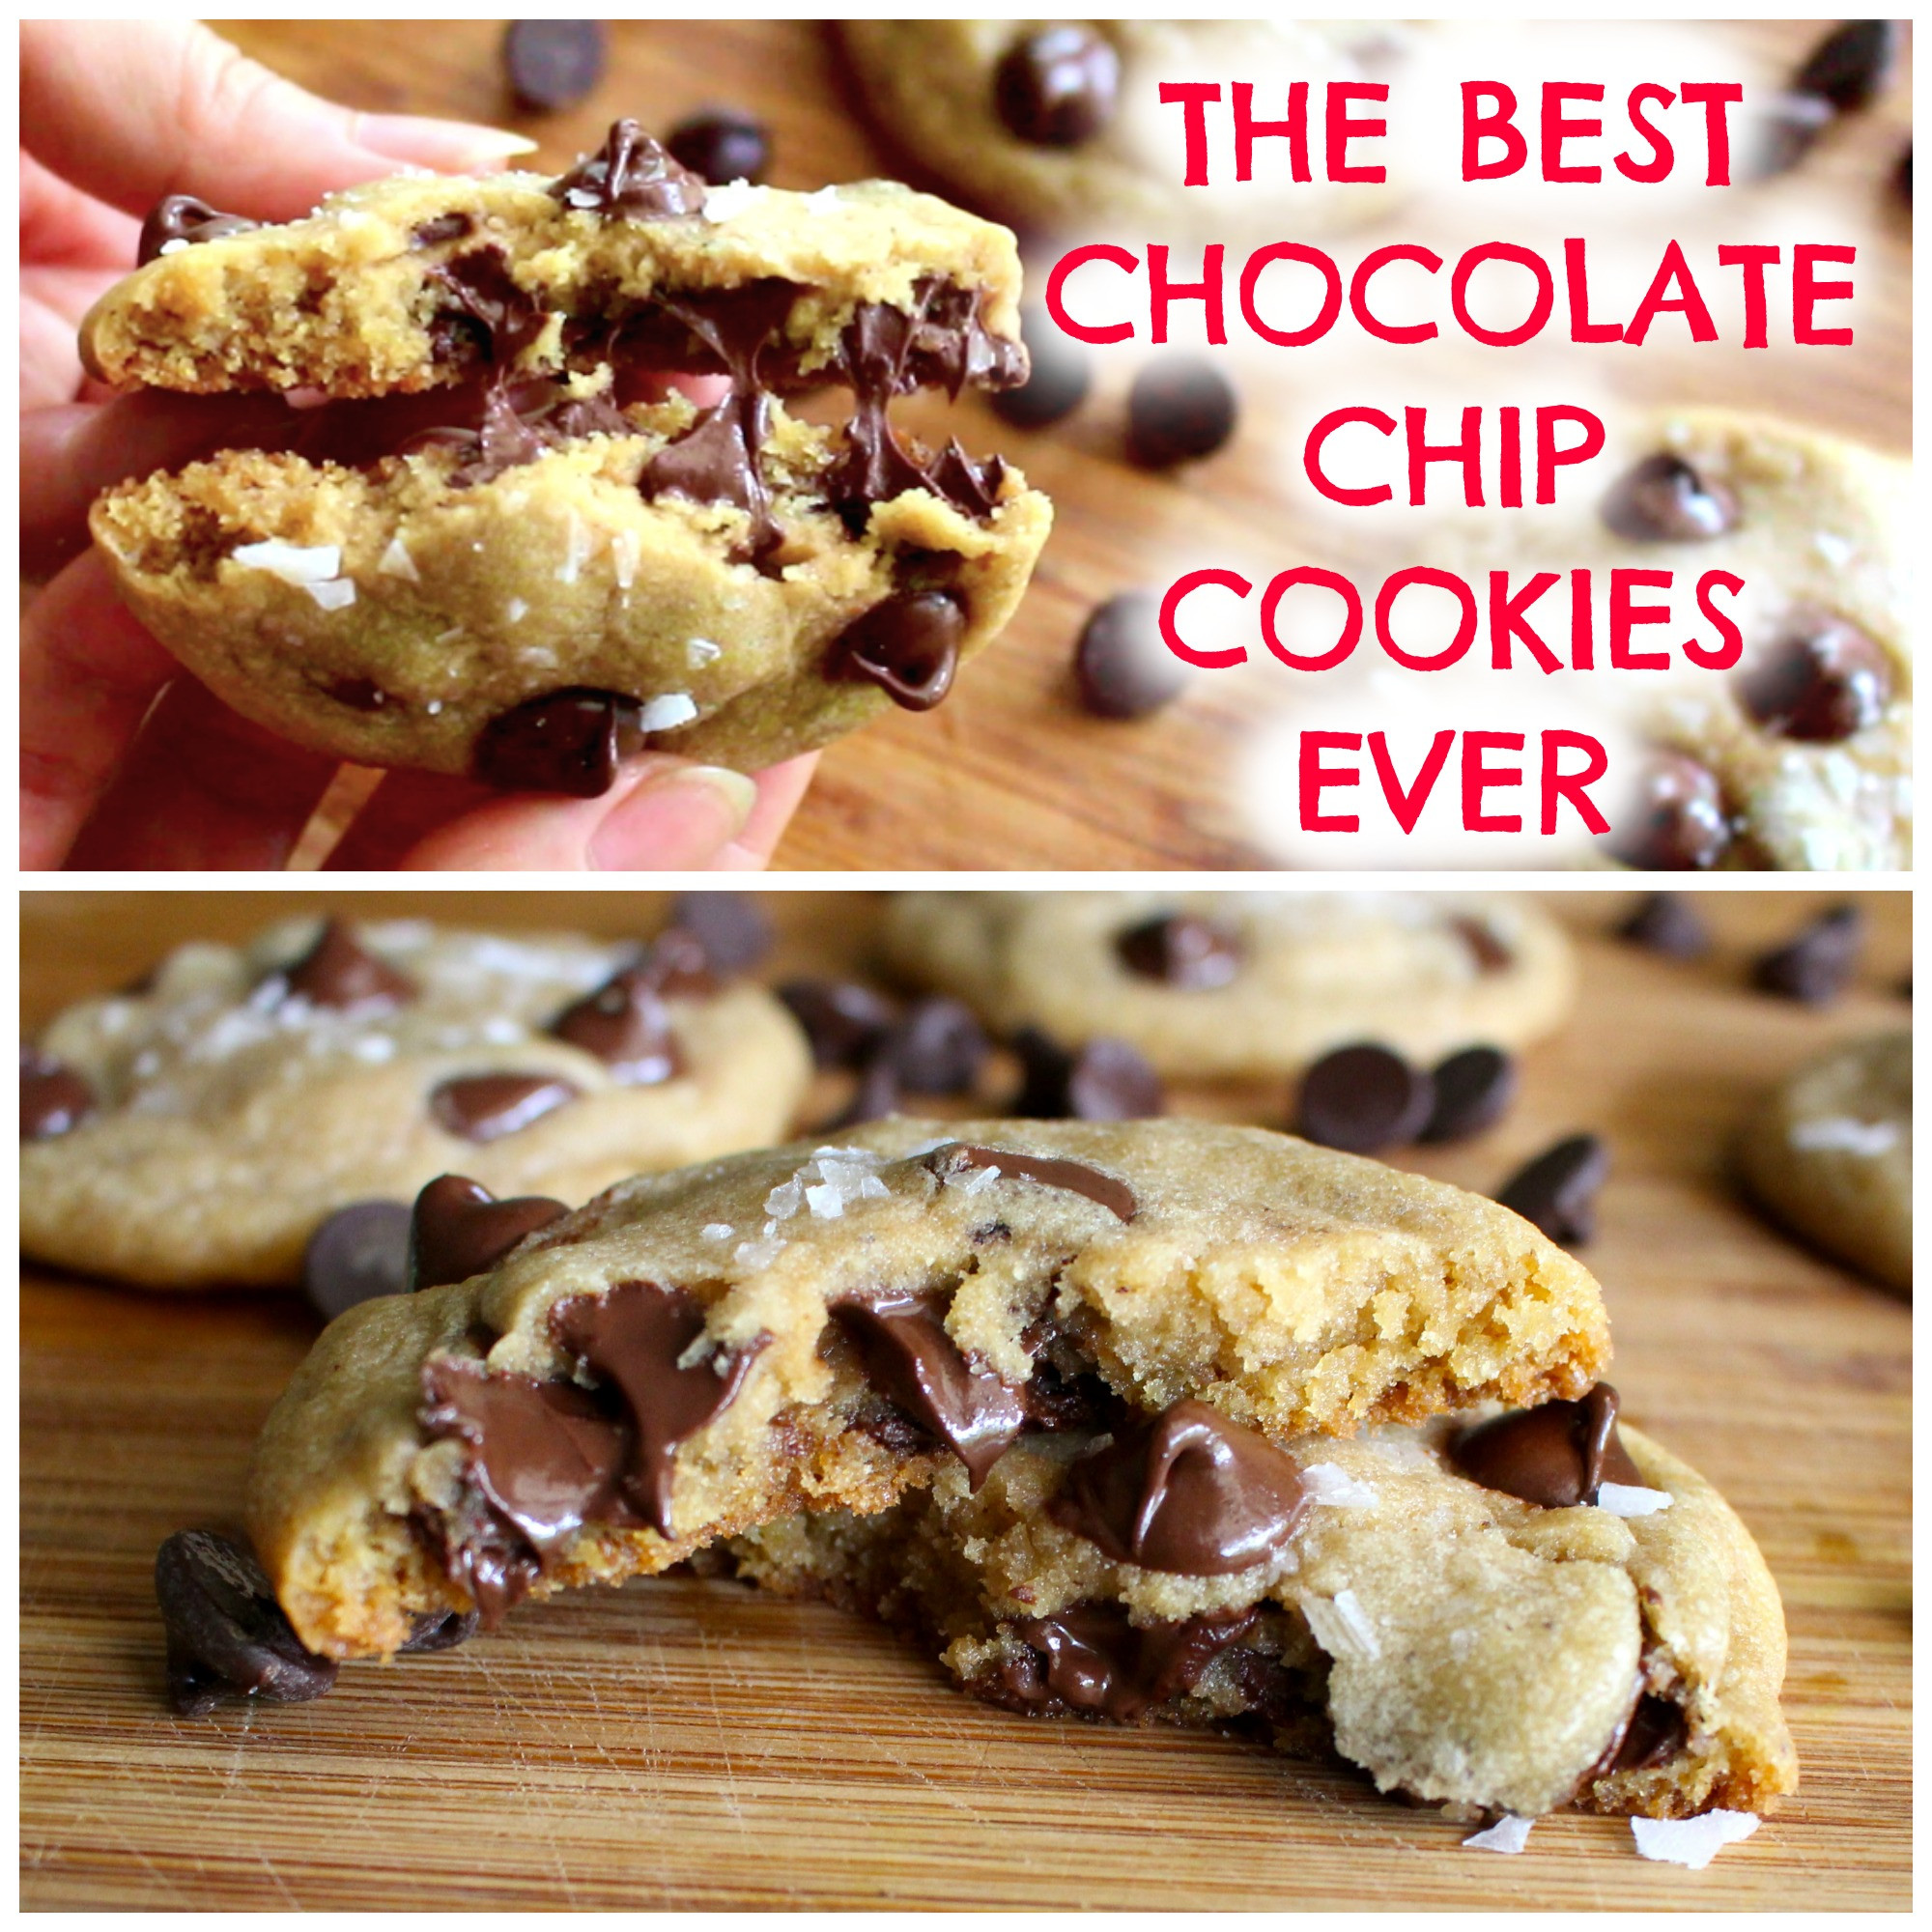 World'S Best Chocolate Chip Cookies
 The Best Chocolate Chip Cookies Ever